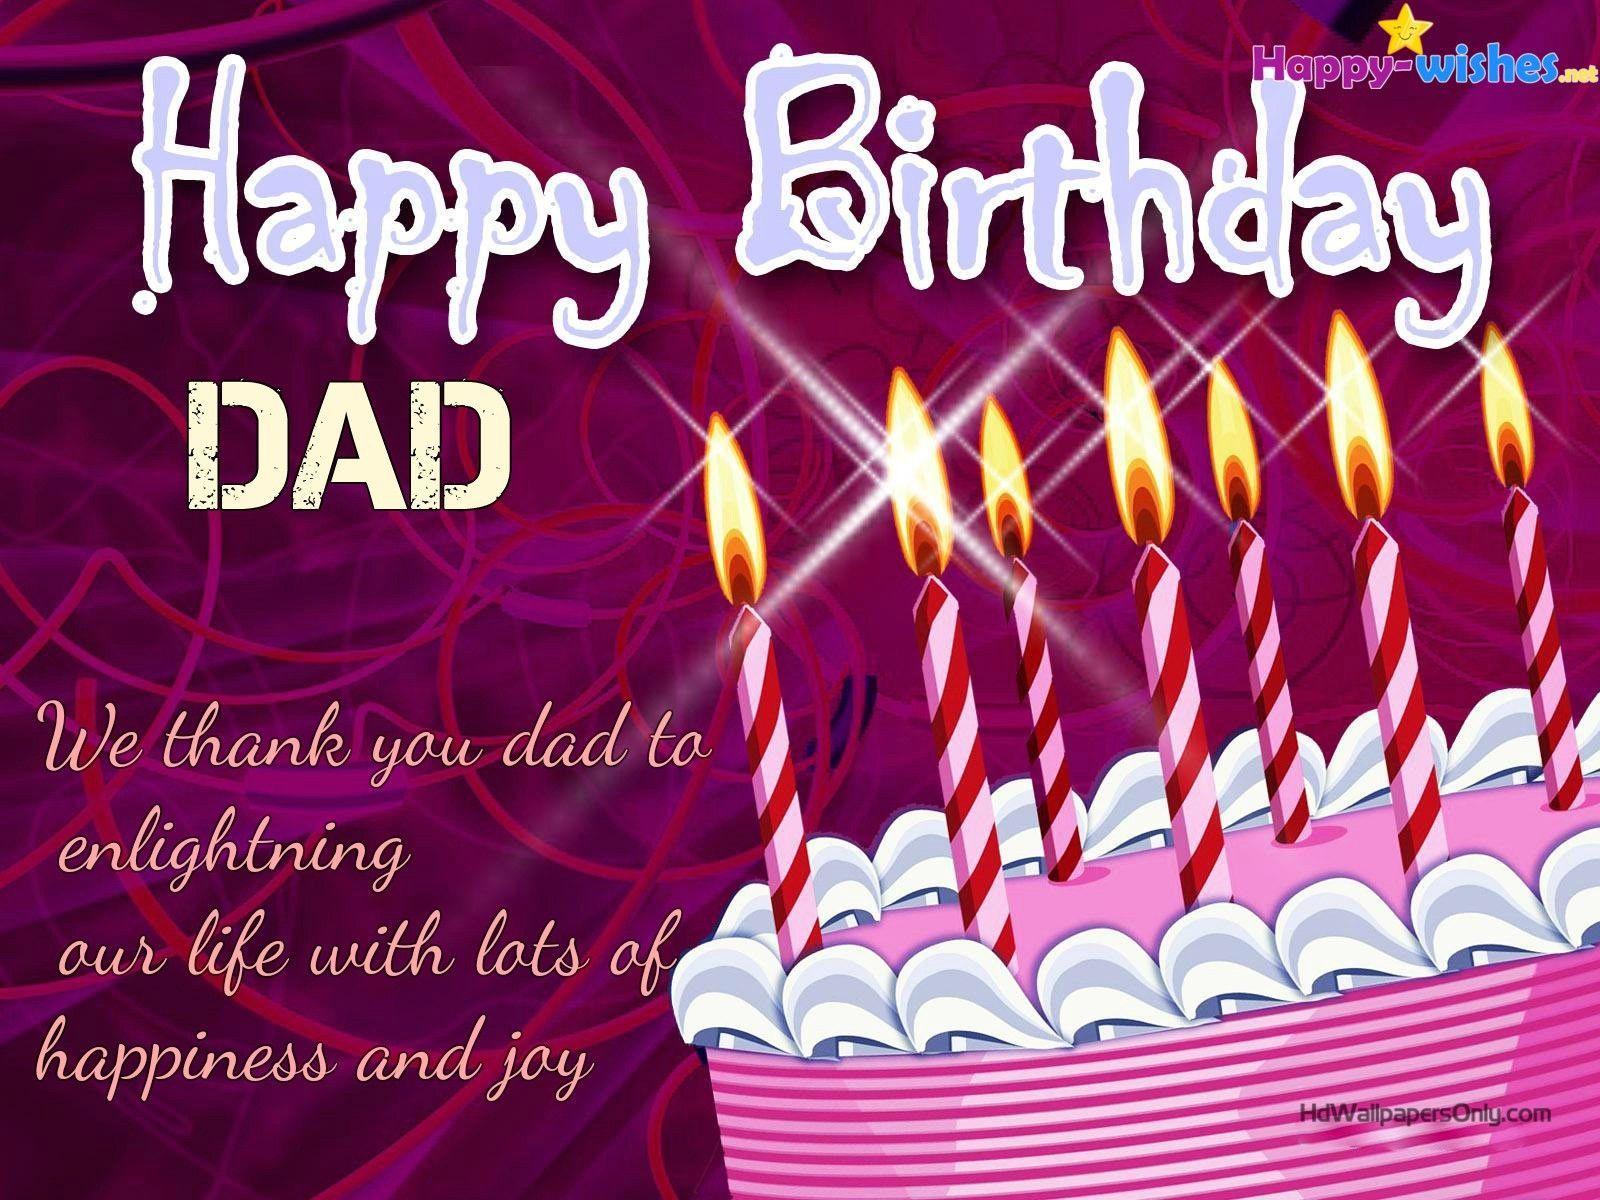 Happy Birthday Wishes For Dad, Image and Memes